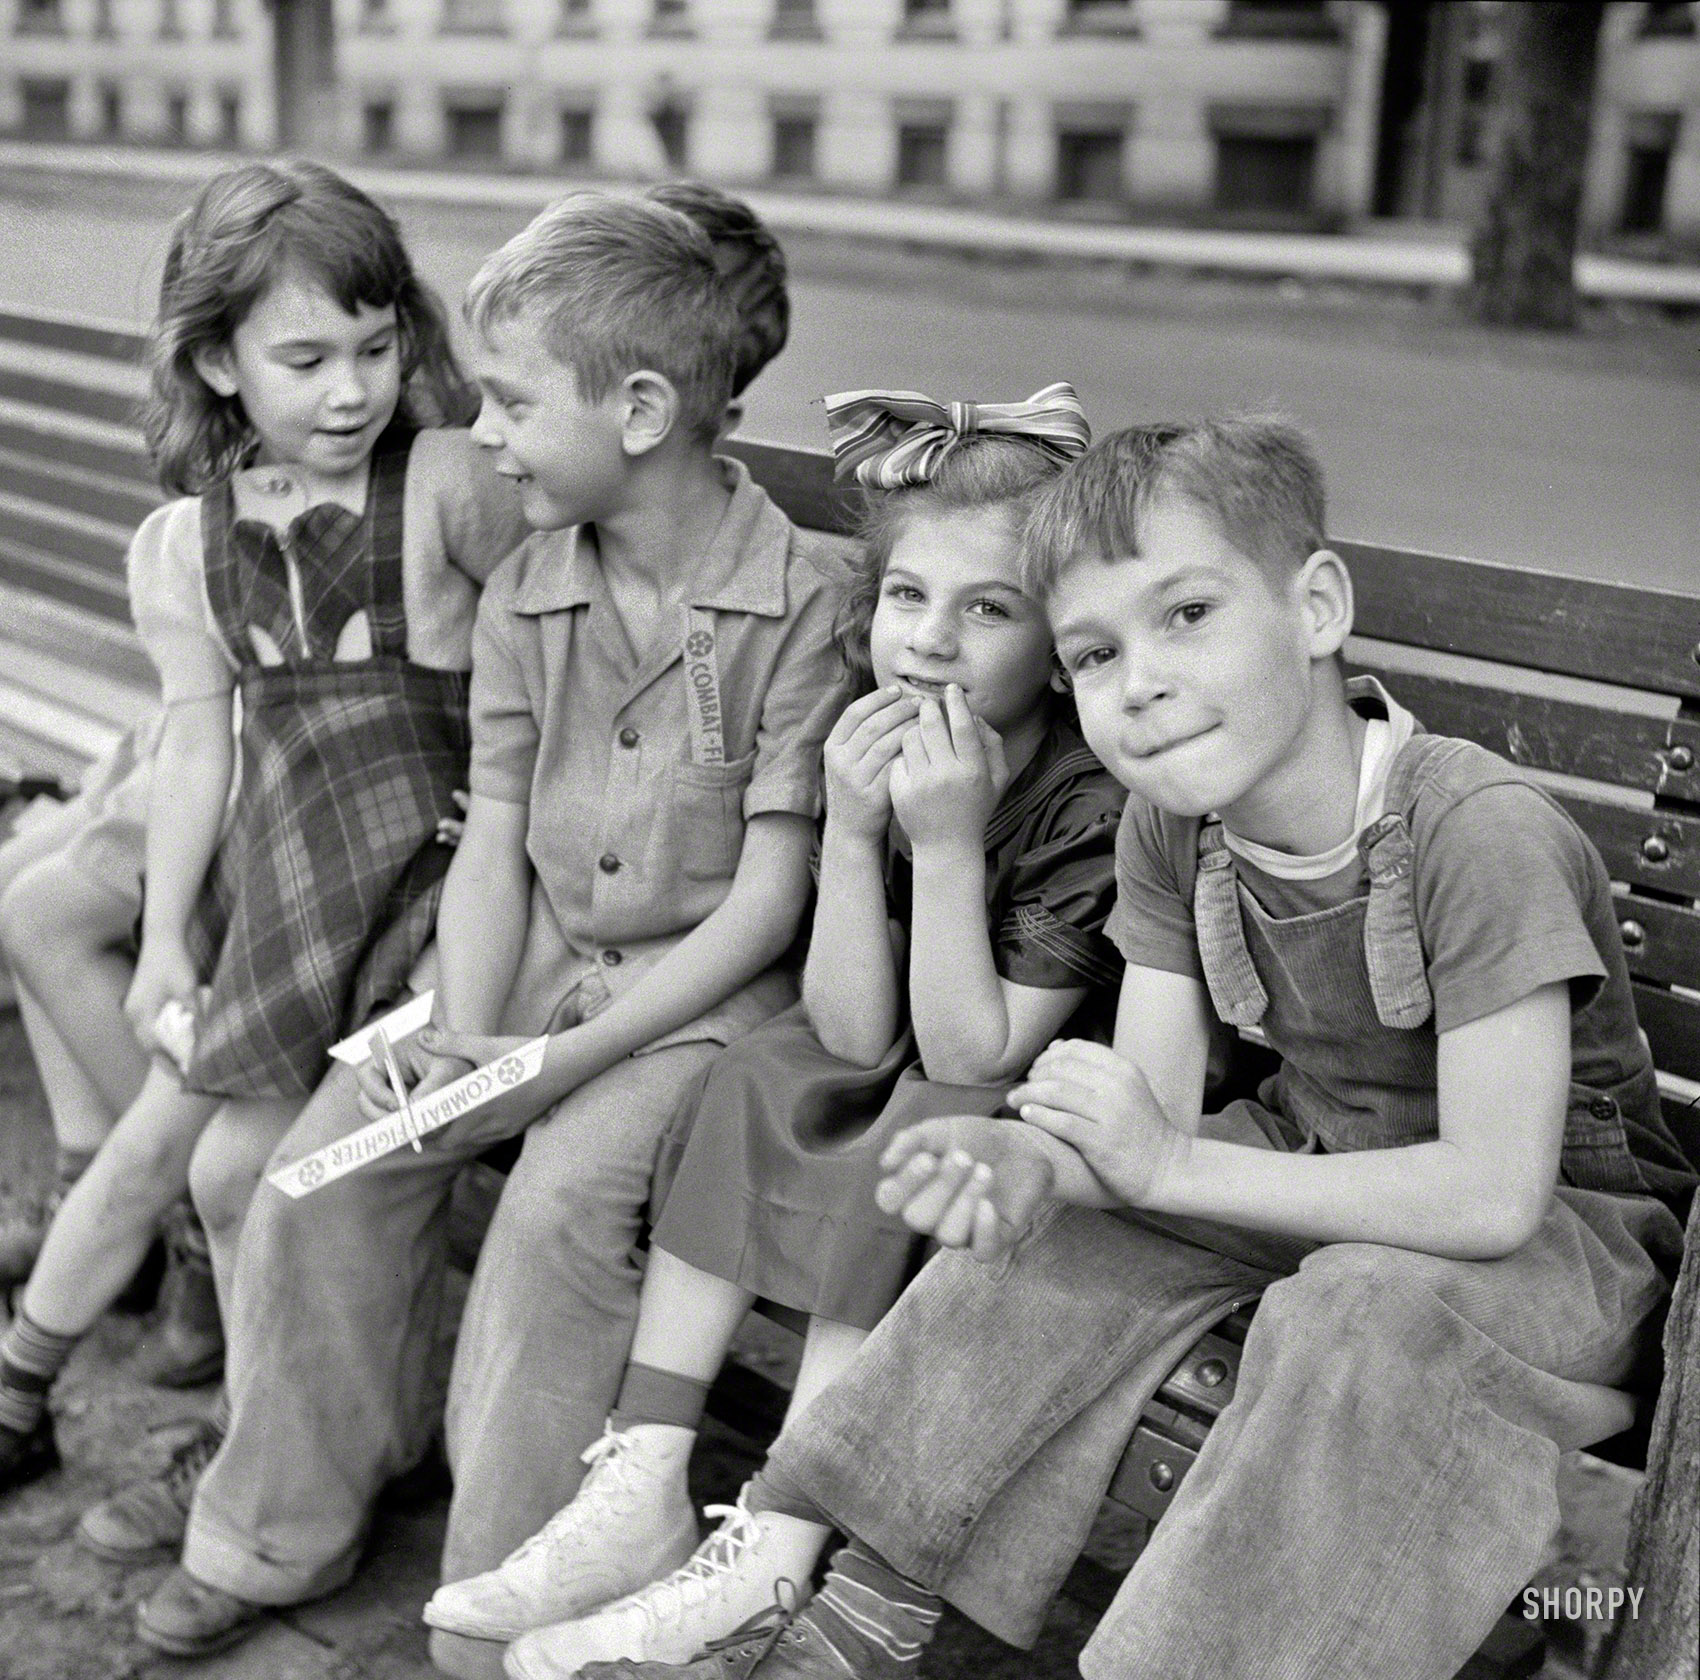 September 1941. "Millworkers' children. Holyoke, Massachusetts." Our fighter pilot again, and some more of his pals. Photo by John Collier. View full size.